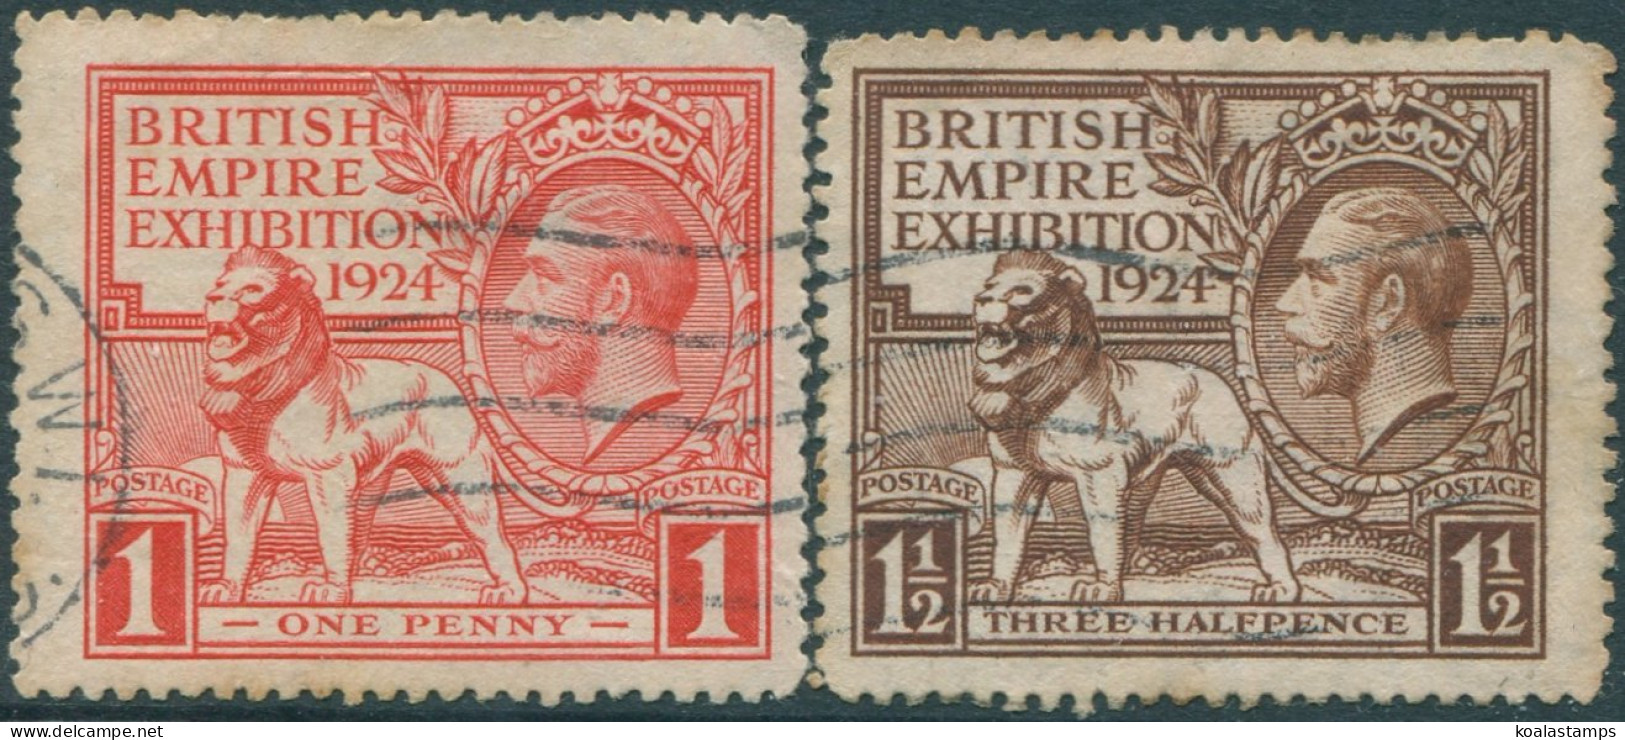 Great Britain 1924 SG430-431 Exhibition Set KGV FU (amd) - Unclassified